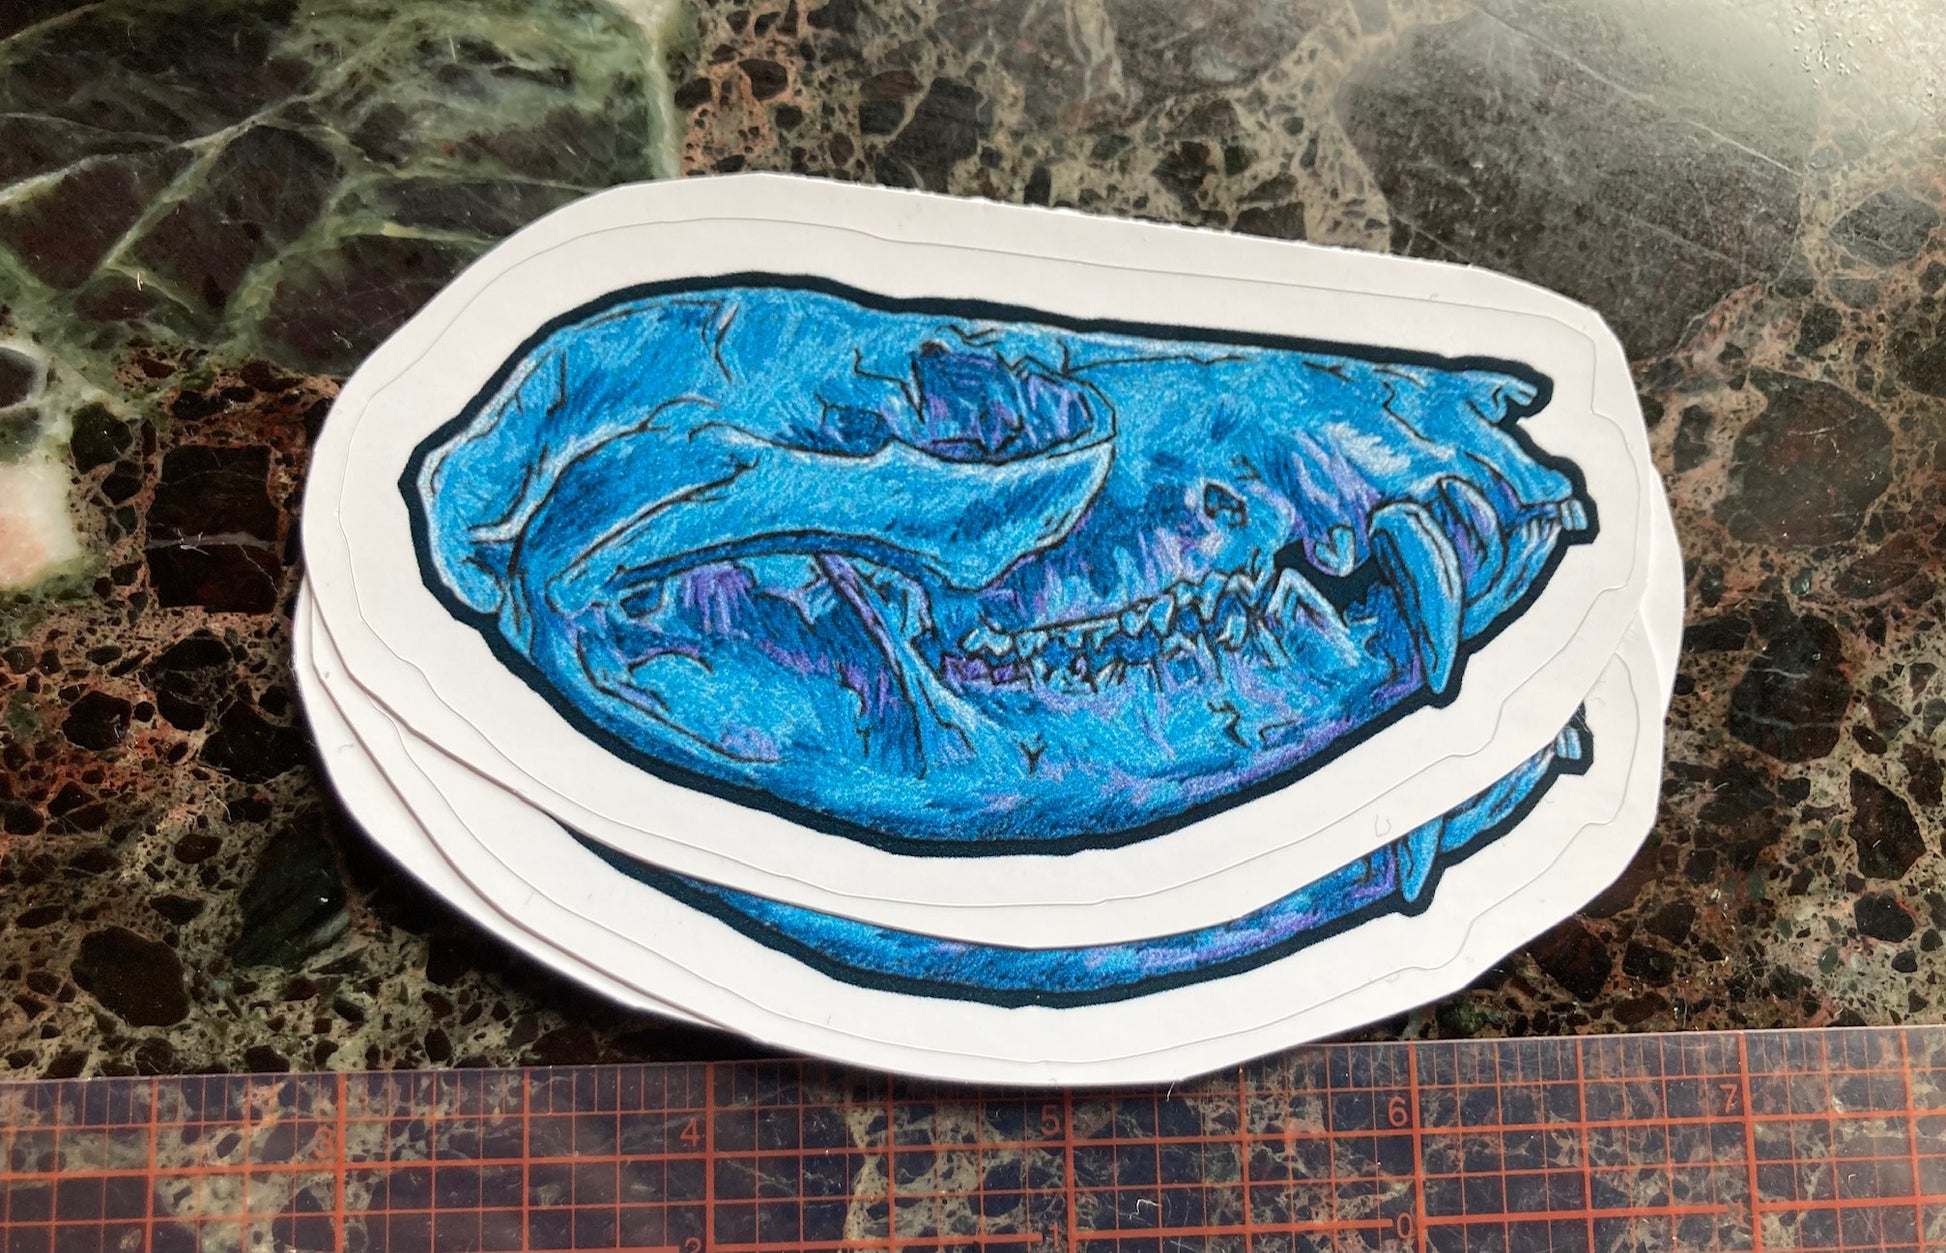 a pile of stickers with an image of an embroidered opossum skull in blue and purple tones sits on a dark surface. There is a visible ruler showing them to be a little less than 4 inches in length. 